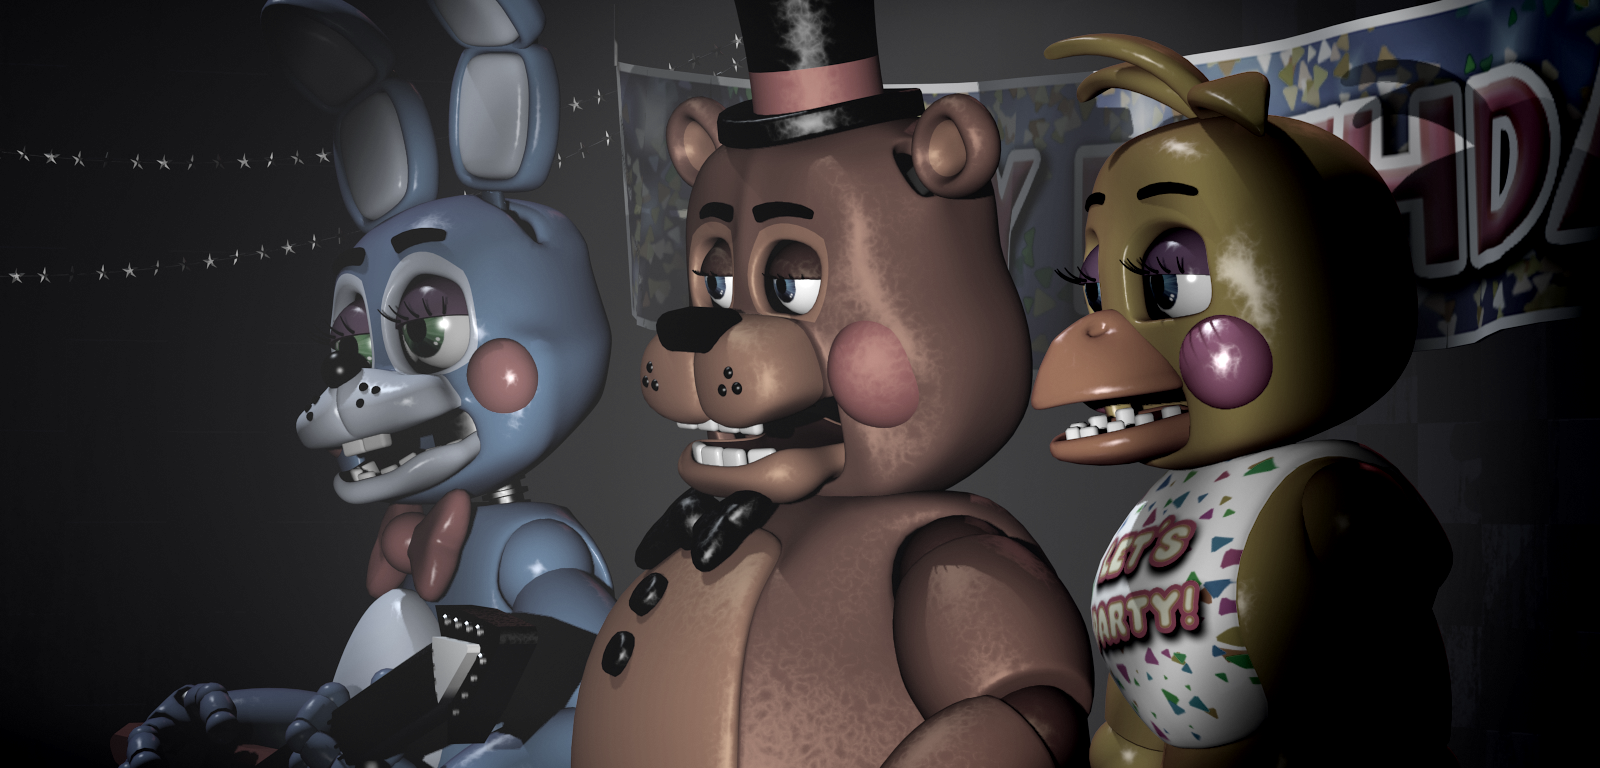 Show Stage (FNaF2), Five Nights at Freddy's Wiki